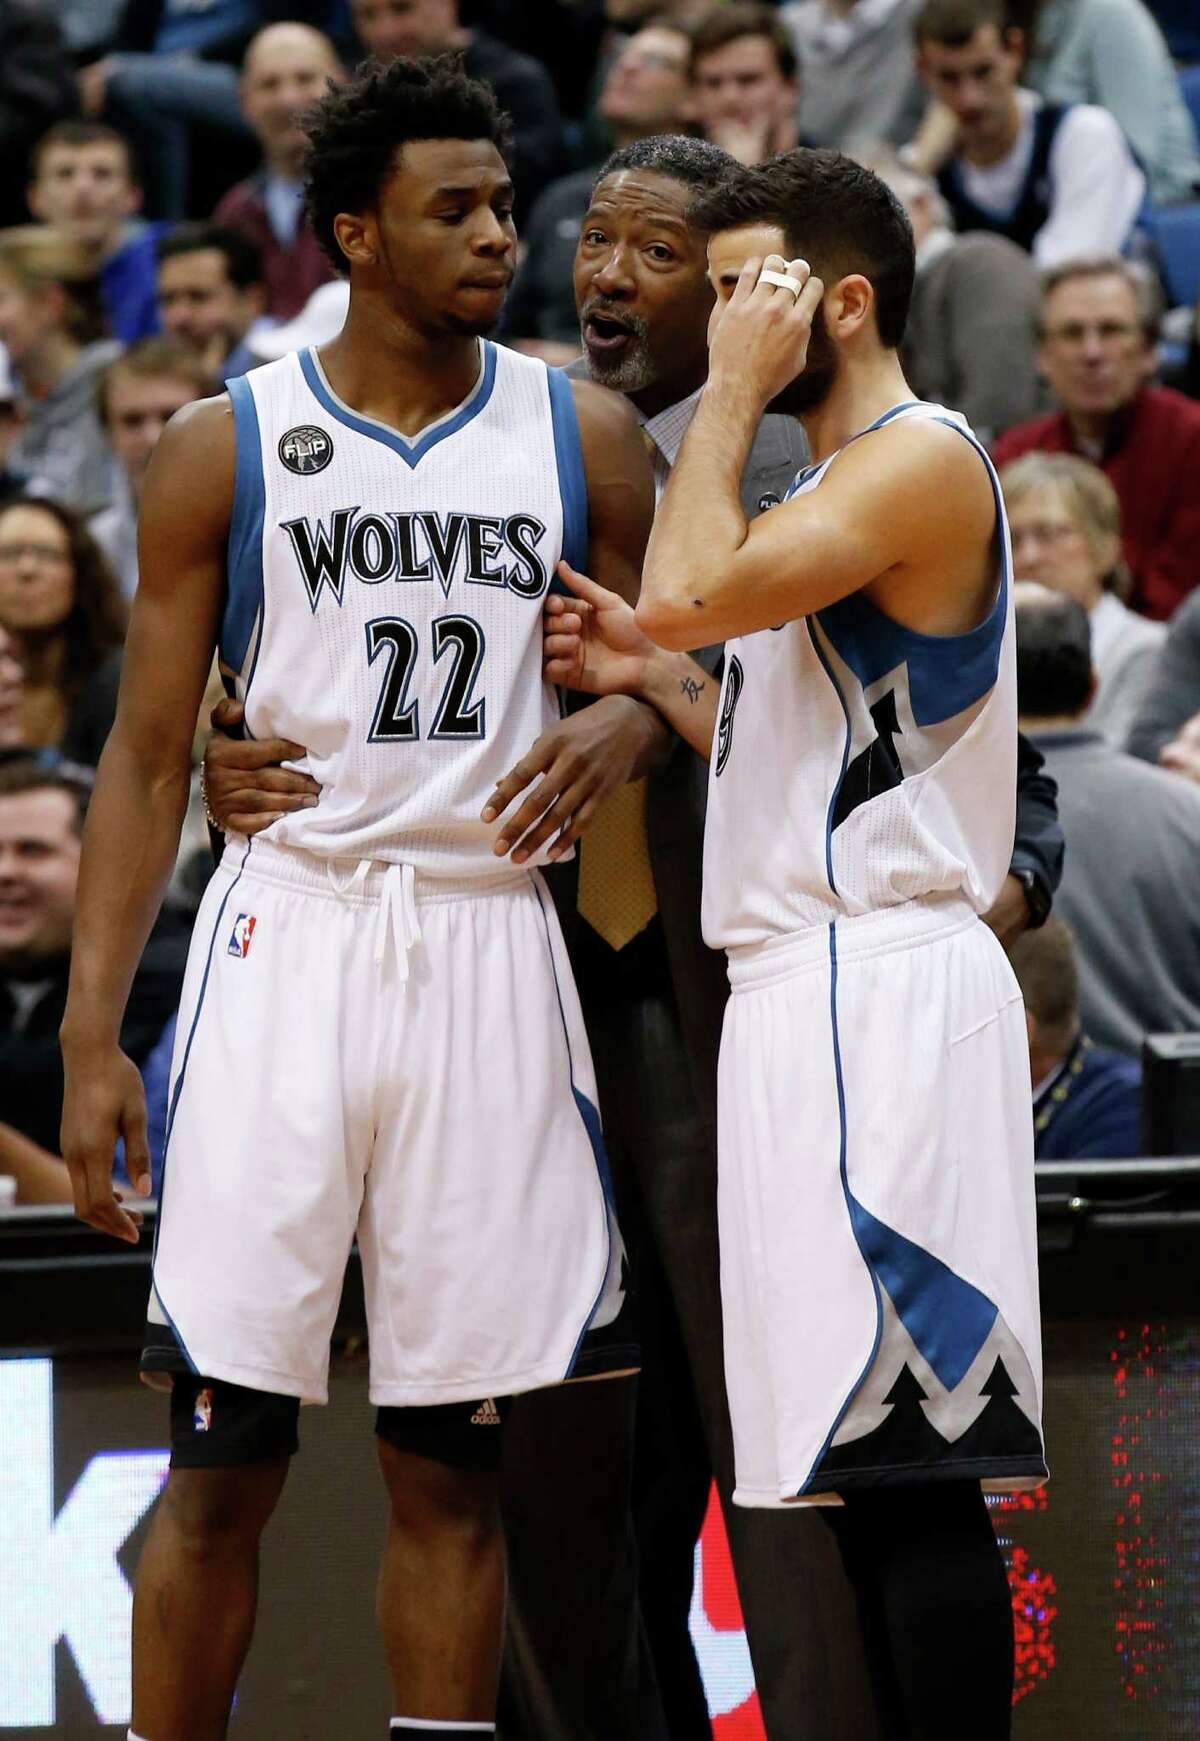 Minnesota Timberwolves head coach Sam Mitchell, center, talks with guards Andrew Wiggins (22) and Ricky Rubio, right, during the first half of an NBA basketball game against the Indiana Pacers in Minneapolis, Saturday, Dec. 26, 2015. (AP Photo/Ann Heisenfelt)